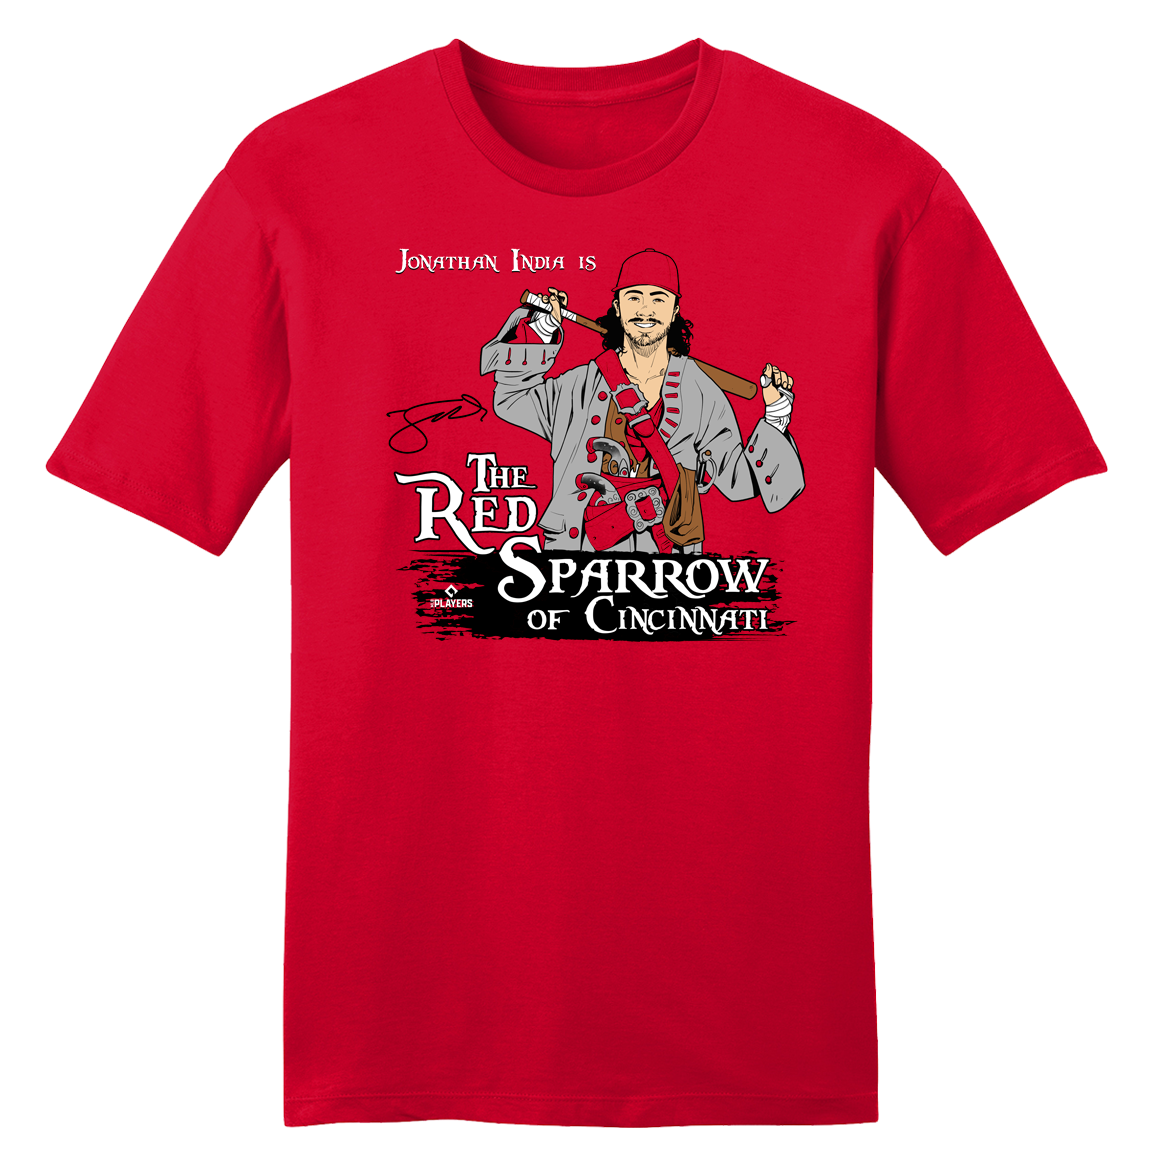 Jonathan India "The Red Sparrow" - Cincy Shirts